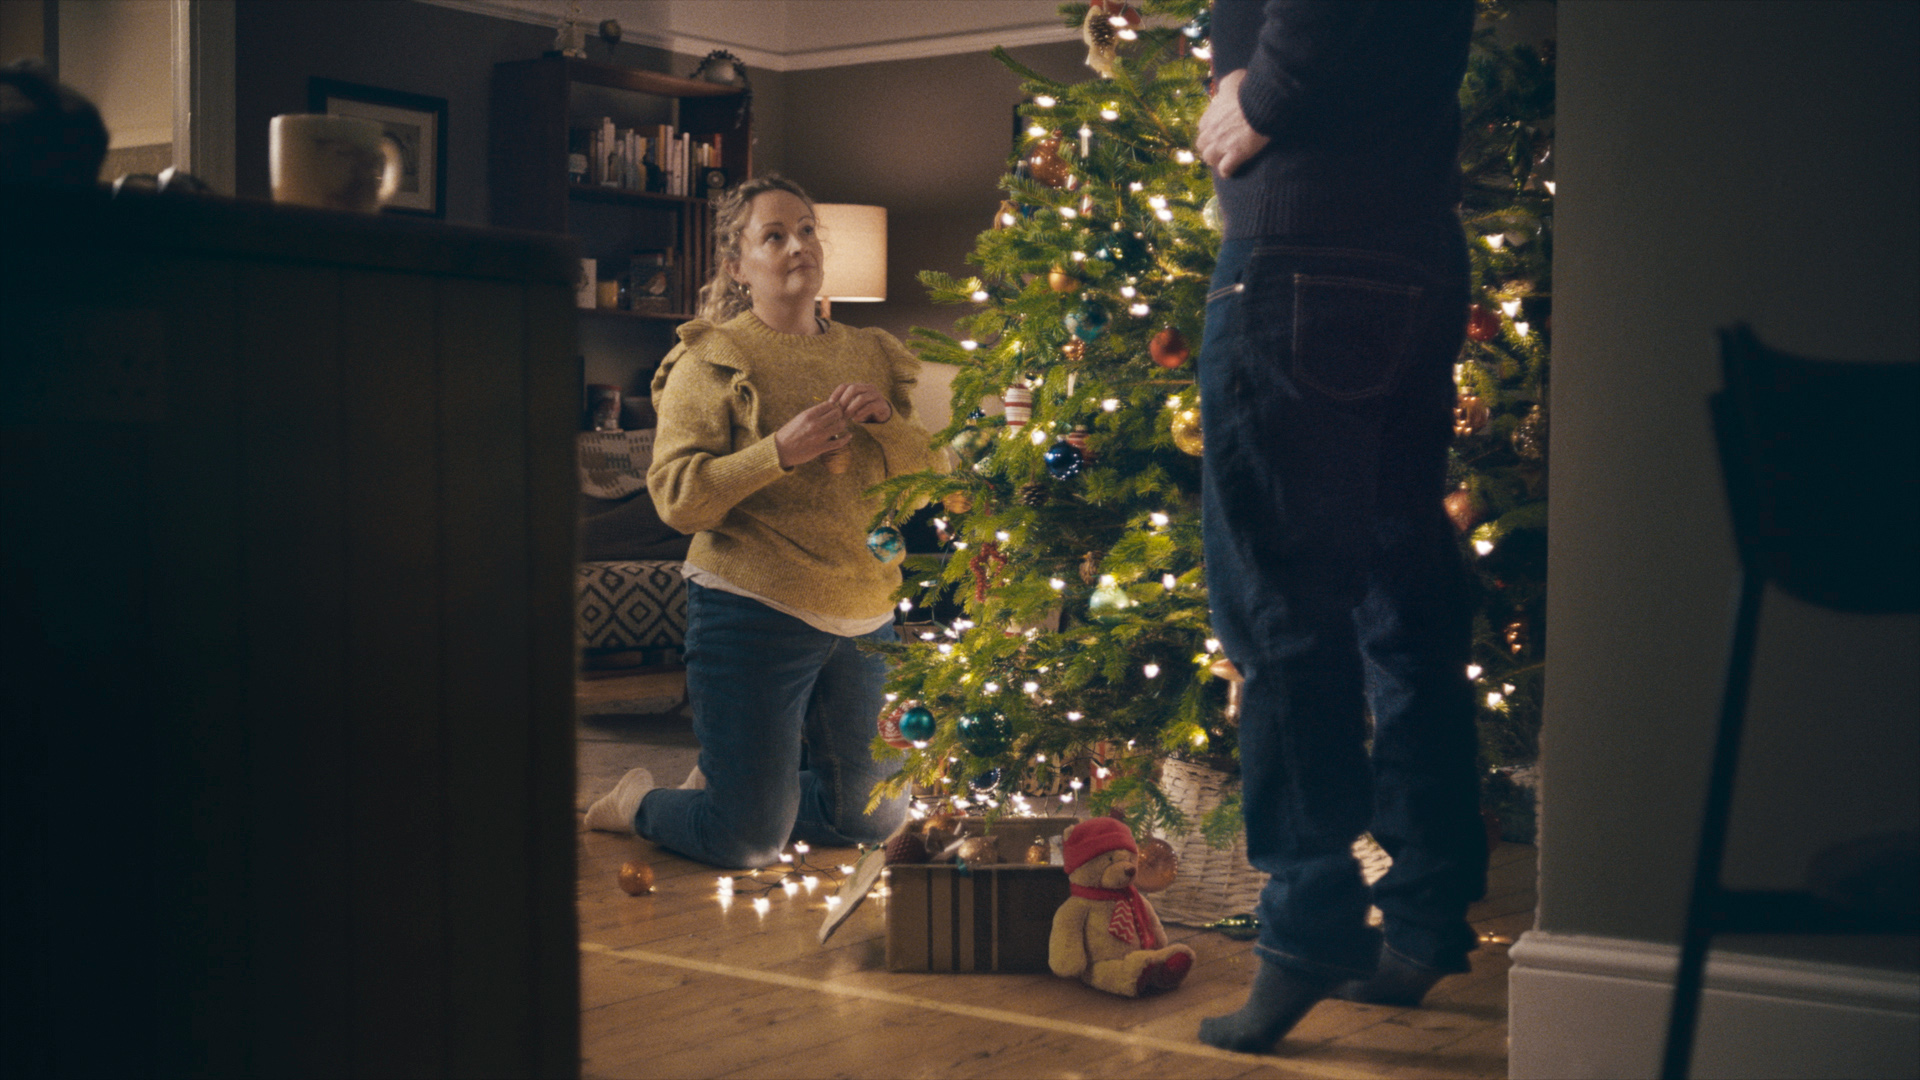 The Christmas advert only features one product placement, the retailer's Lewis Bear.